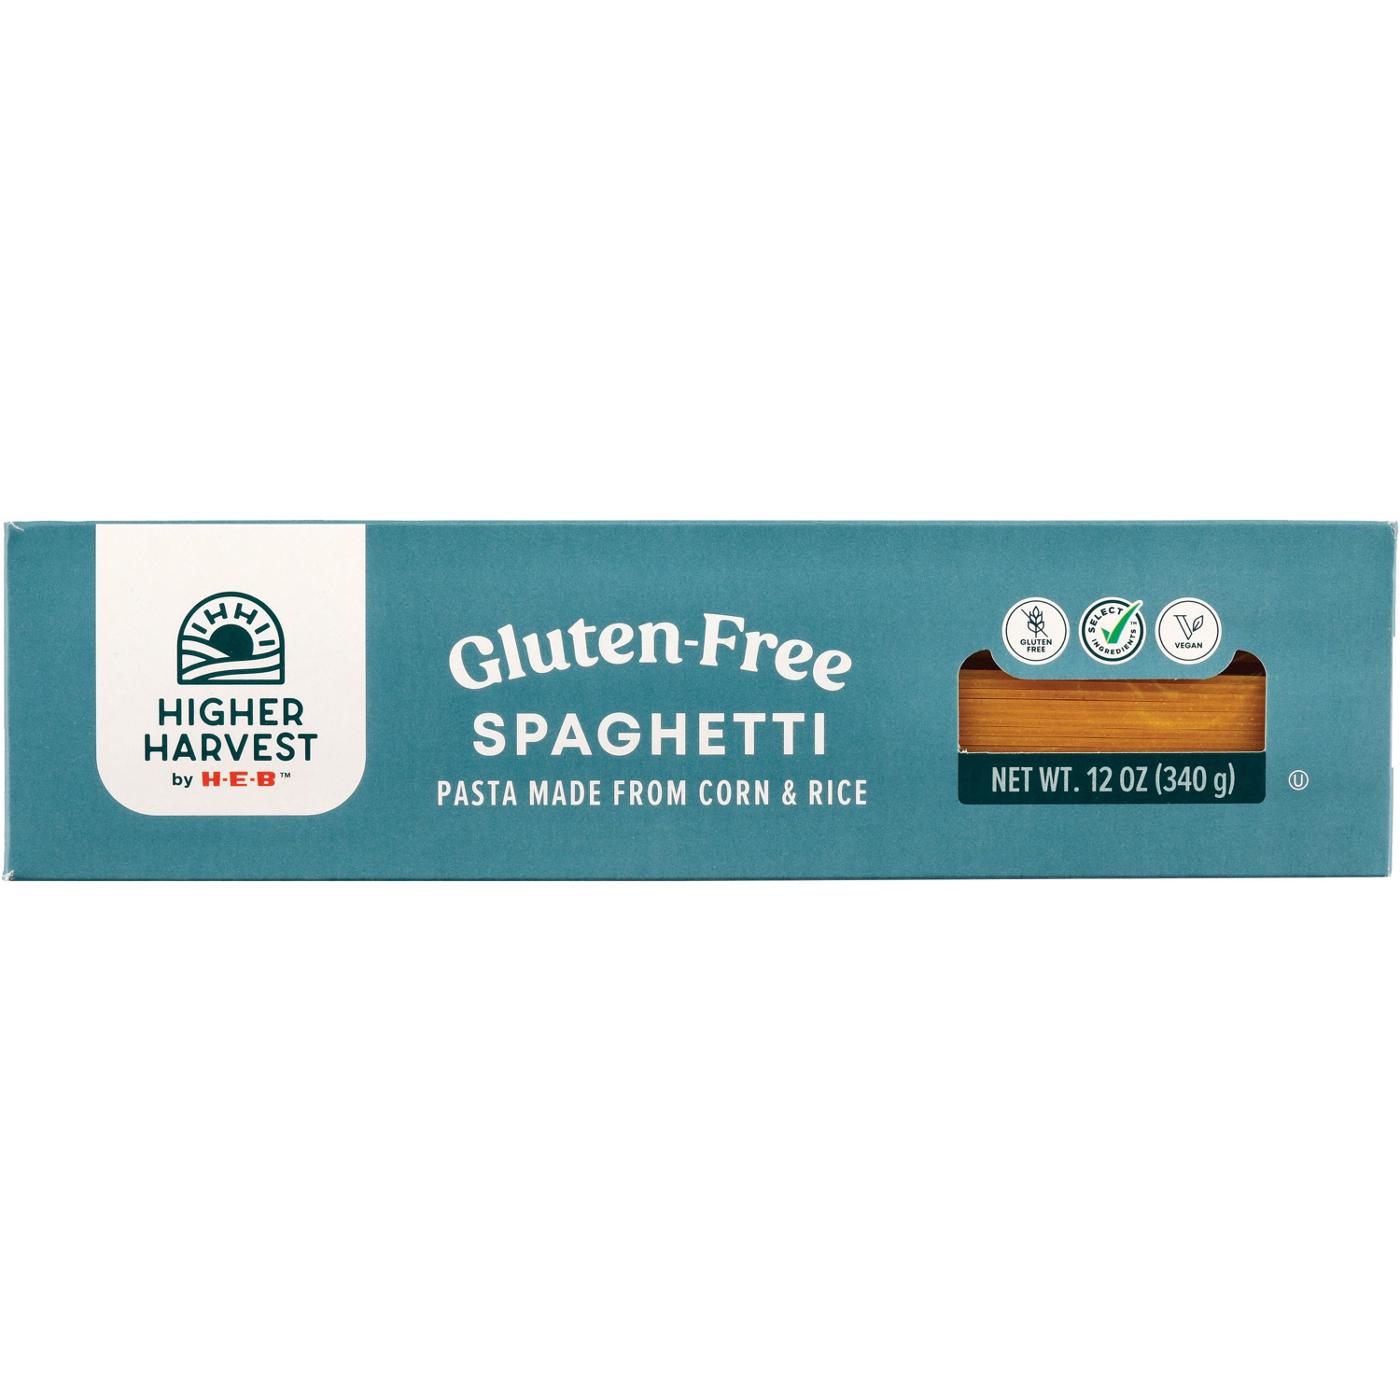 Higher Harvest by H-E-B Gluten-Free Spaghetti Noodles; image 1 of 2